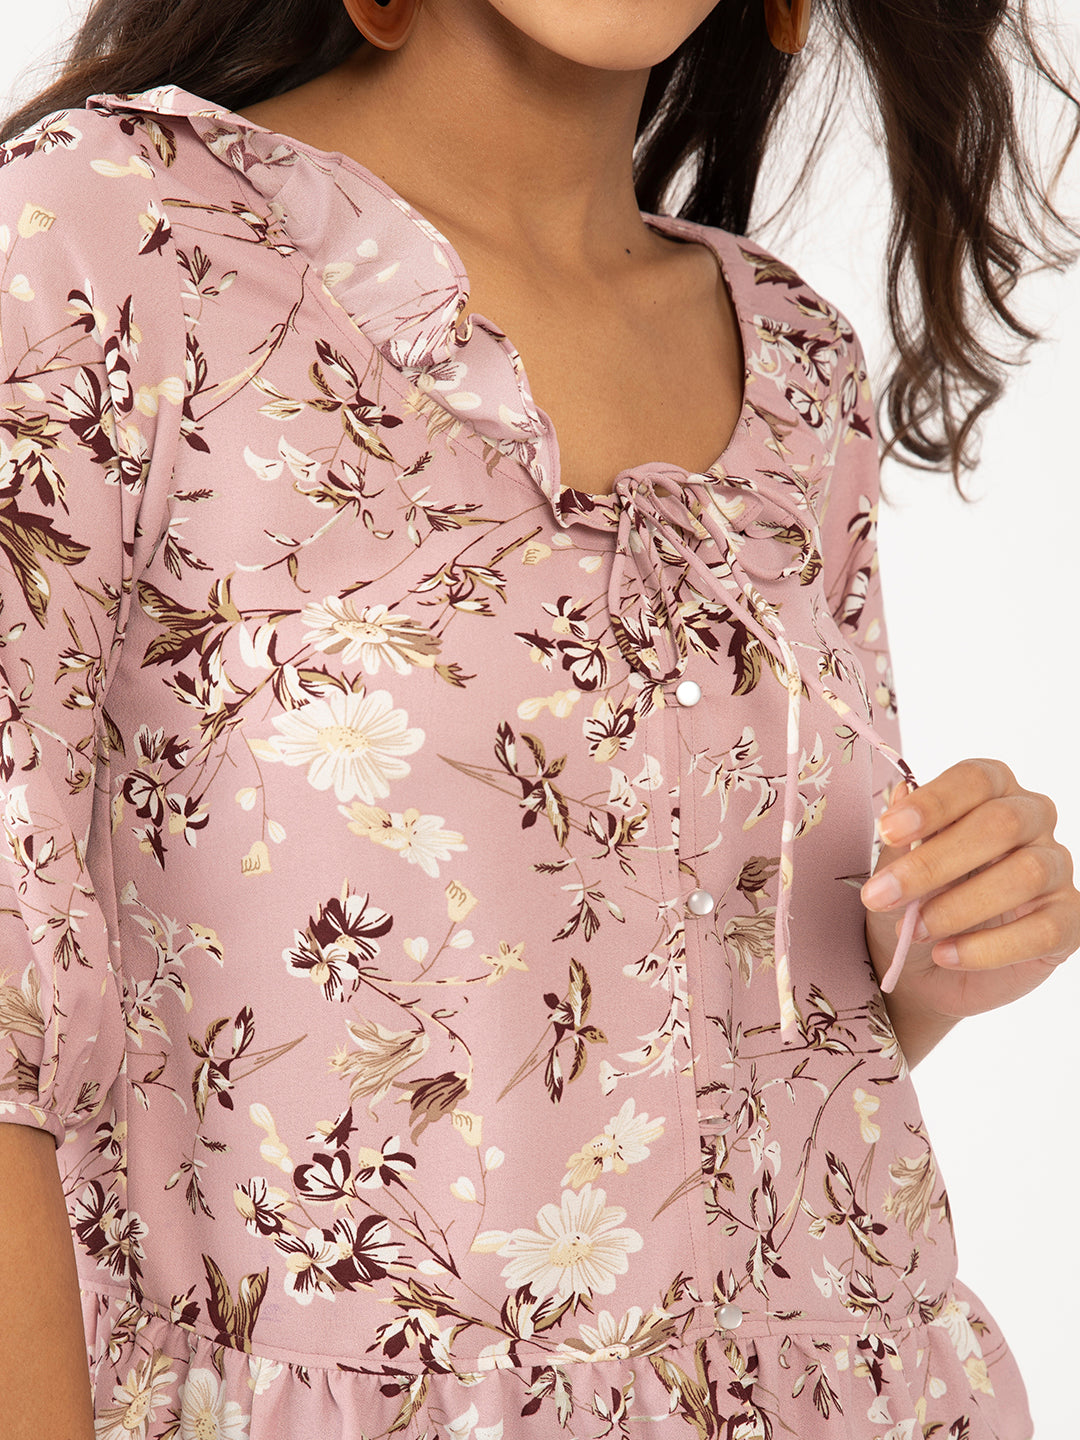 Pink Floral Print Ruffled Top For Women